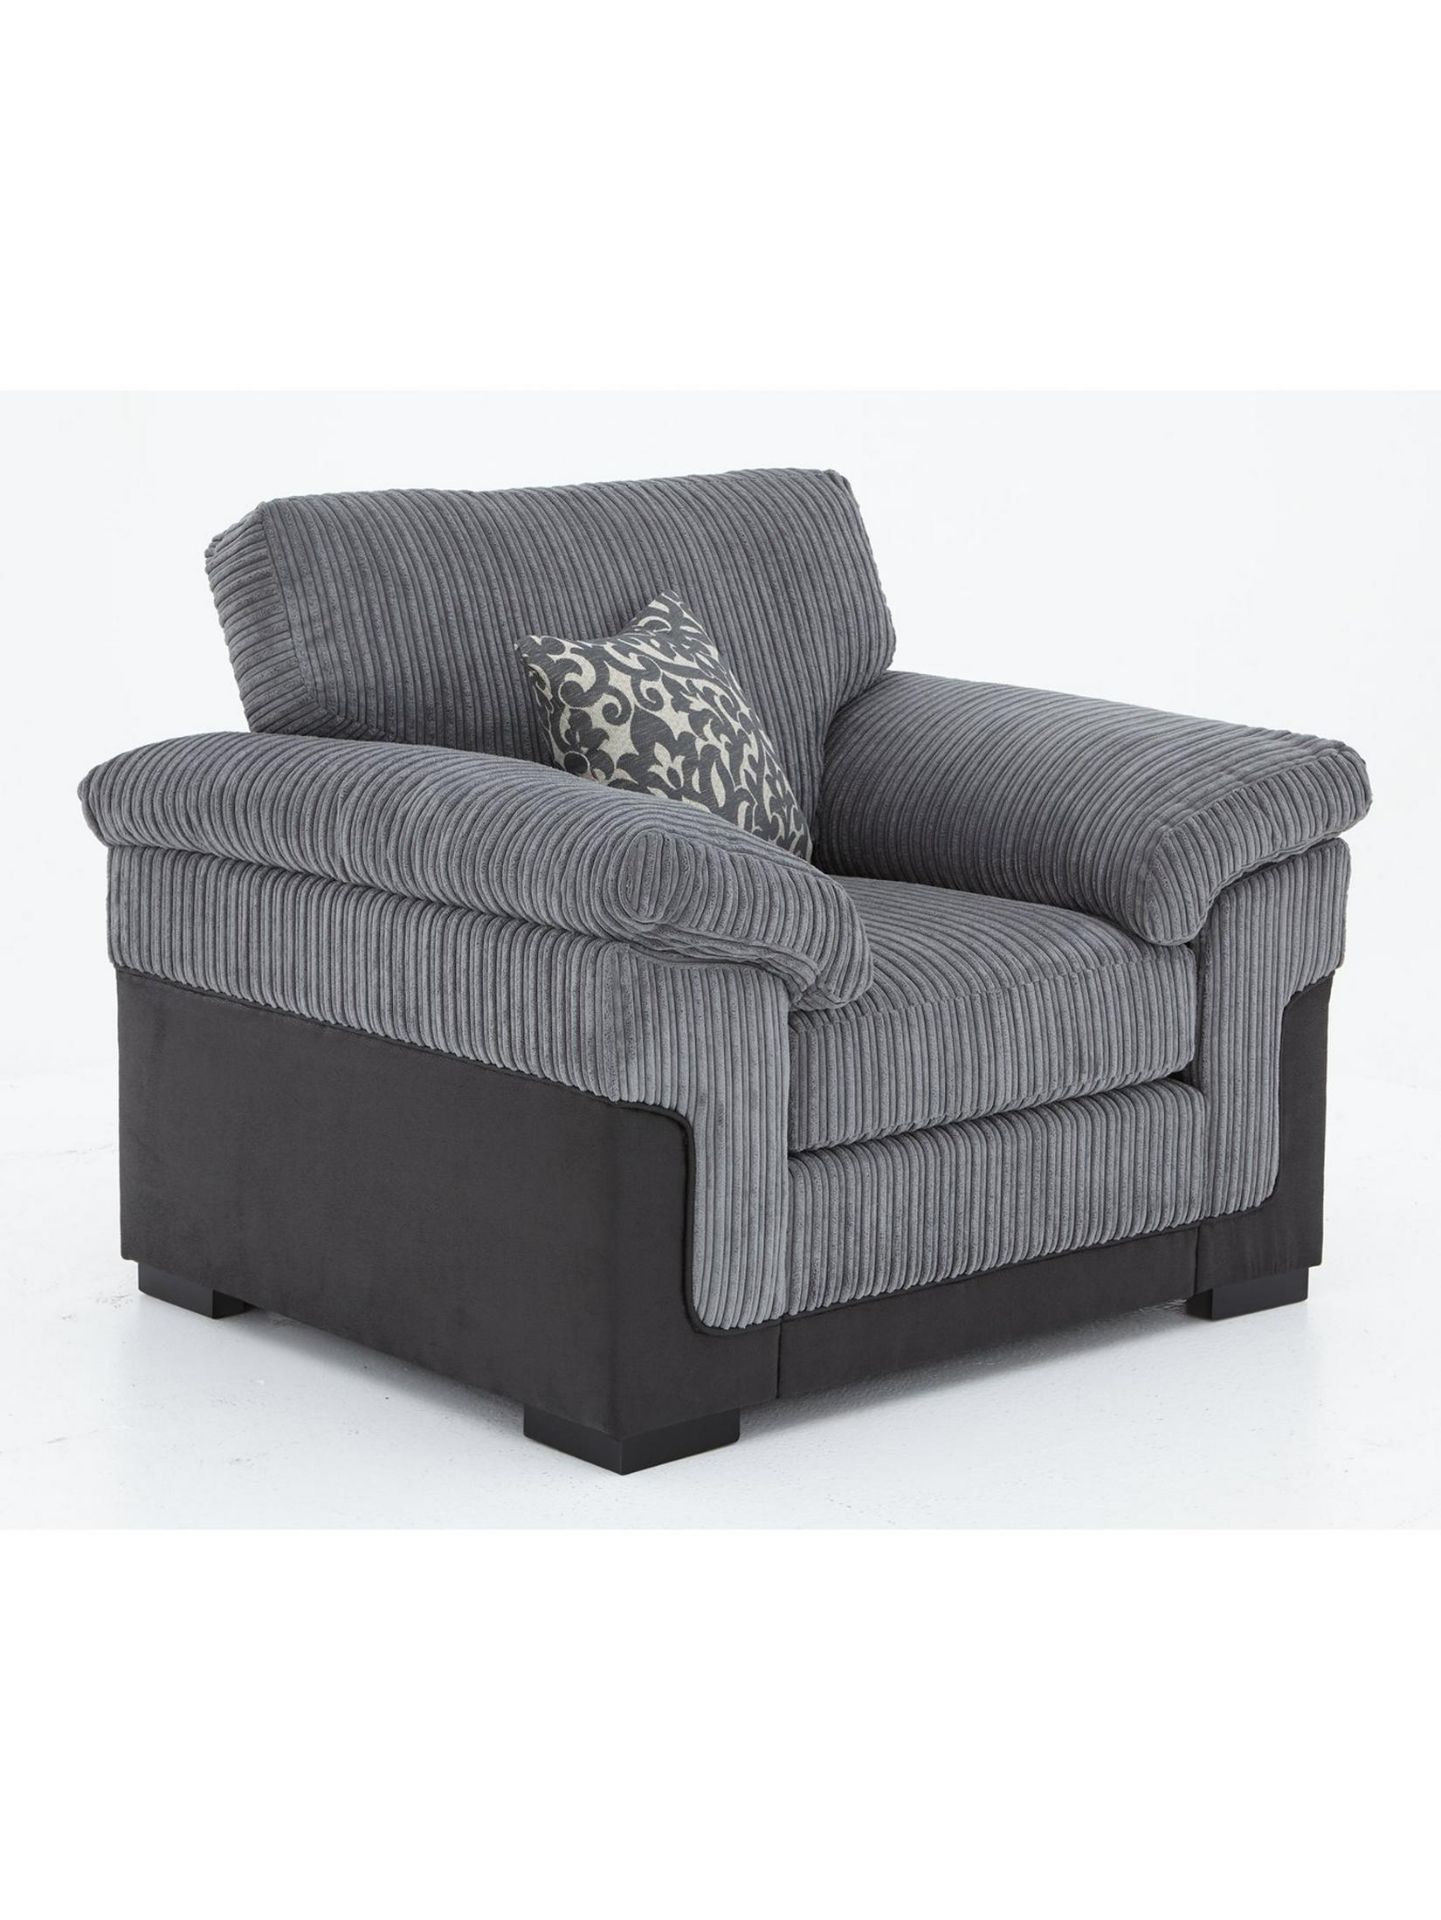 Phoenix Chair. RPP £509.00. Fabric fusion Chunky lines of soft jumbo cord give the inner a - Image 3 of 3